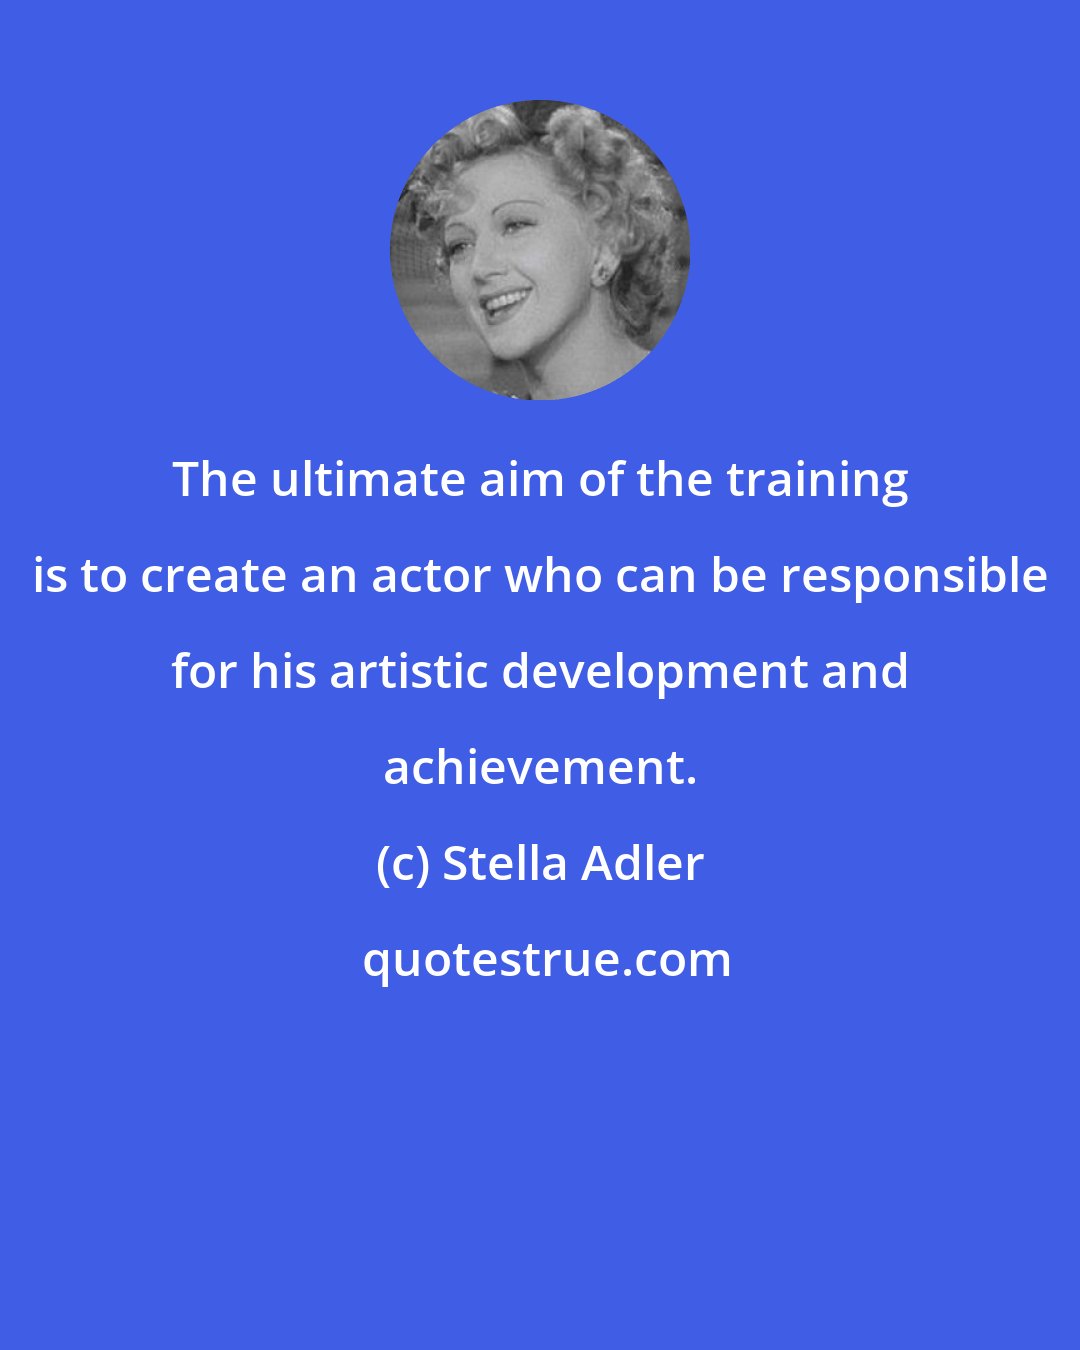 Stella Adler: The ultimate aim of the training is to create an actor who can be responsible for his artistic development and achievement.